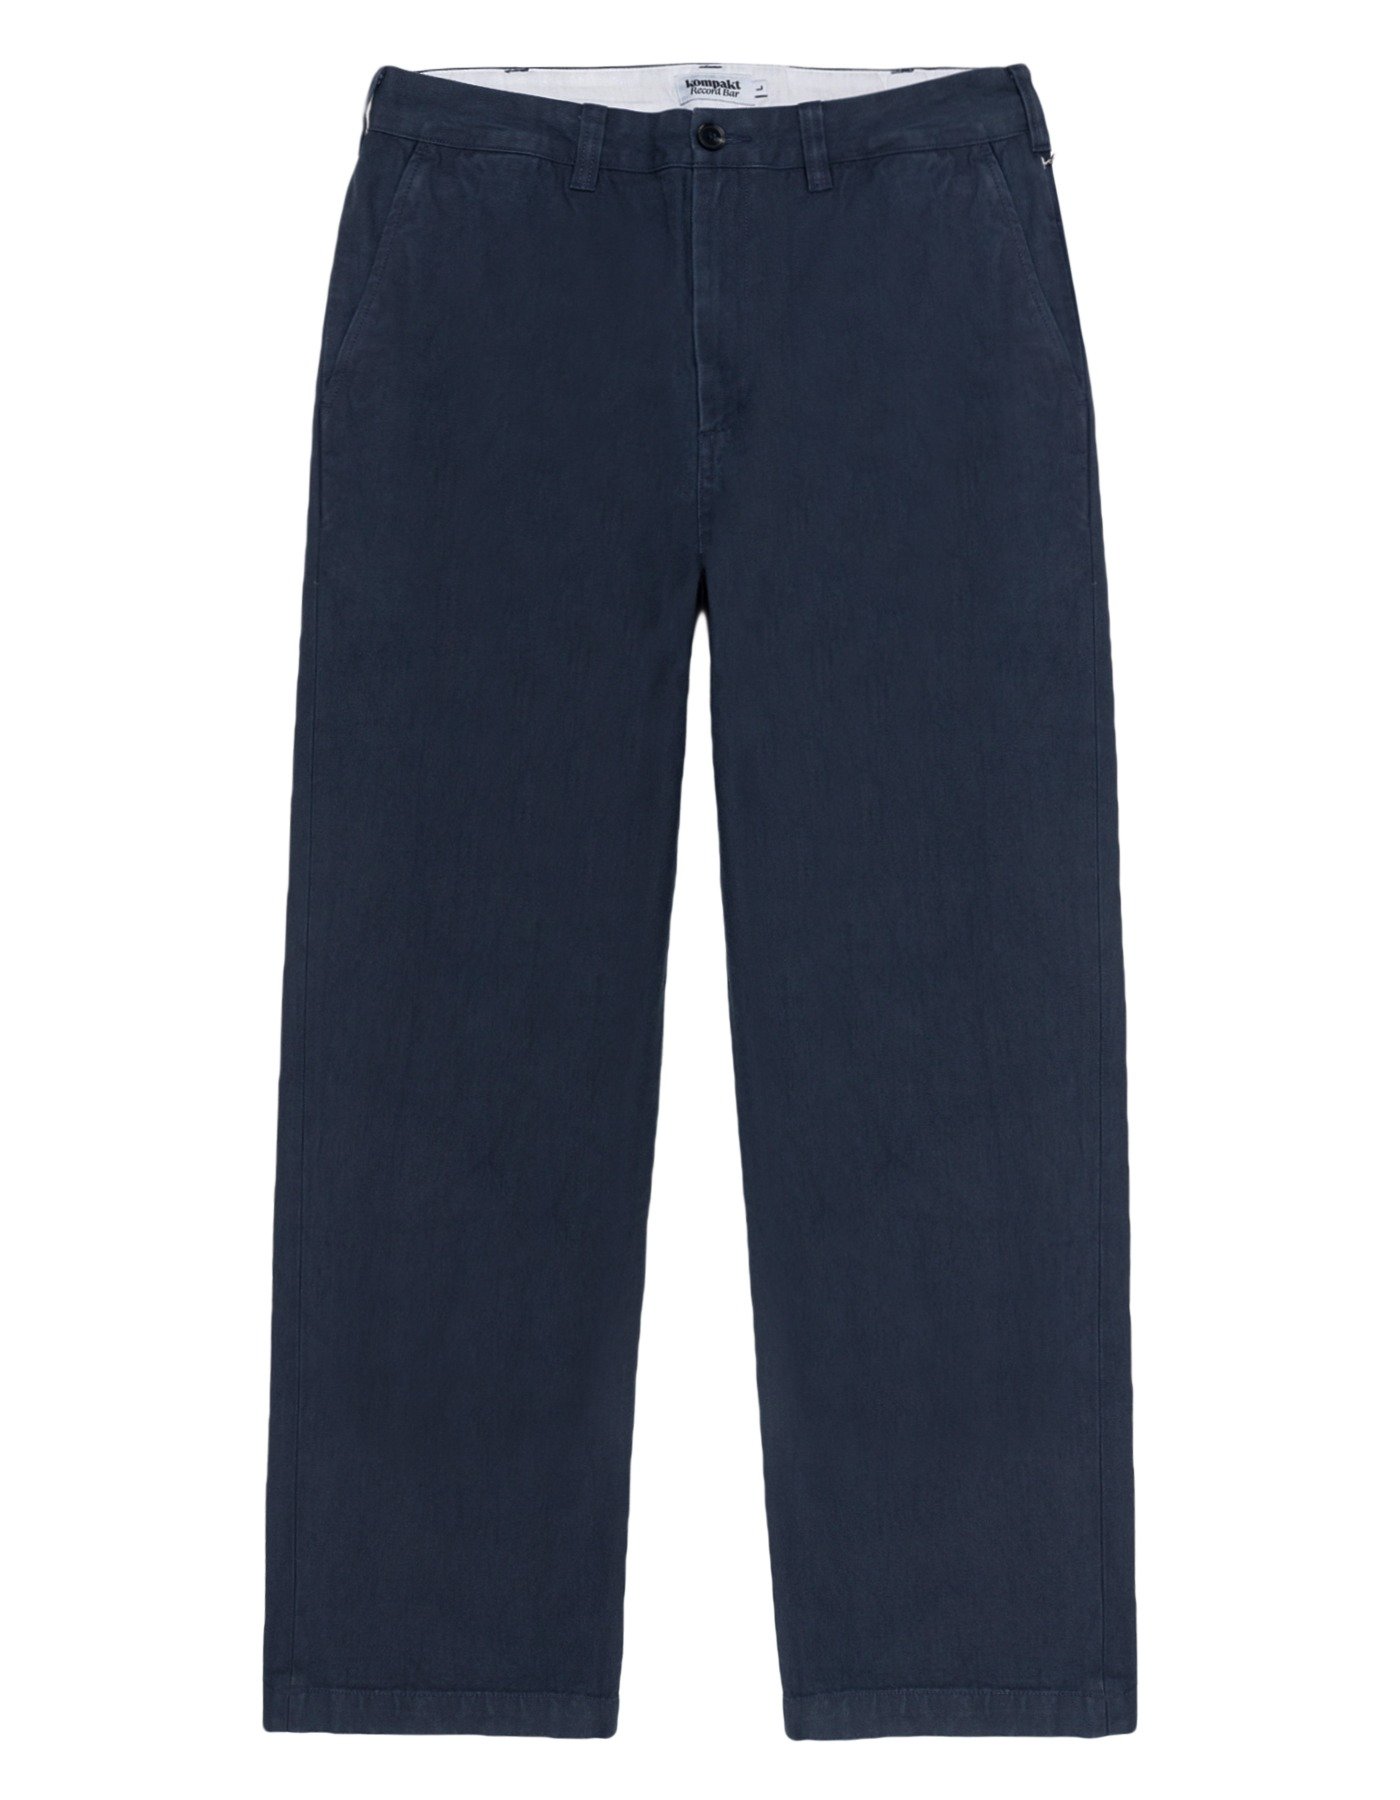 The World is Invited Chino Pants - Navy